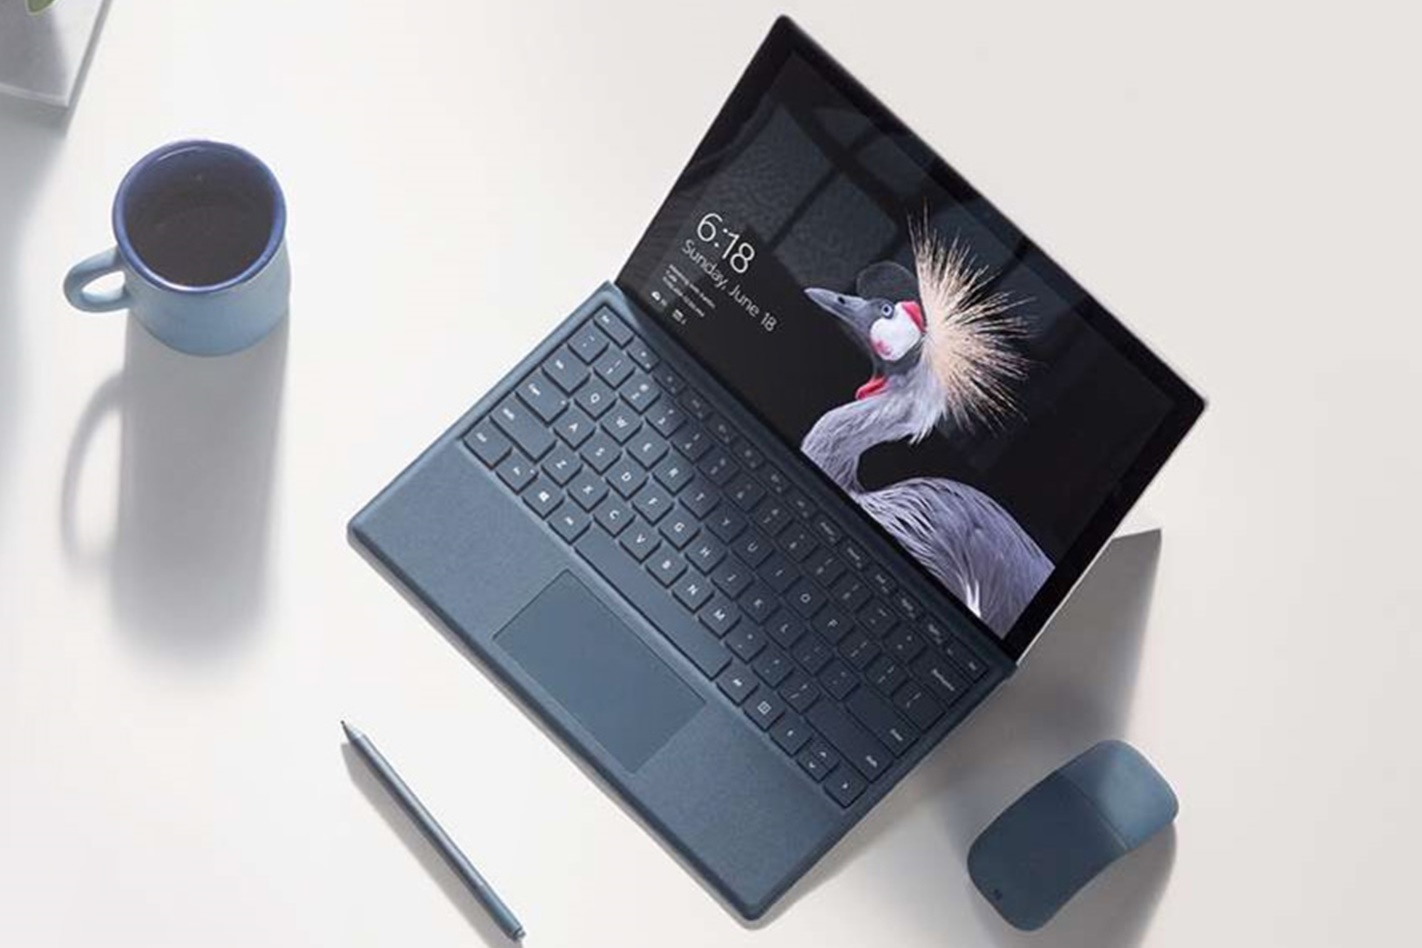 surface pro with 4g lte